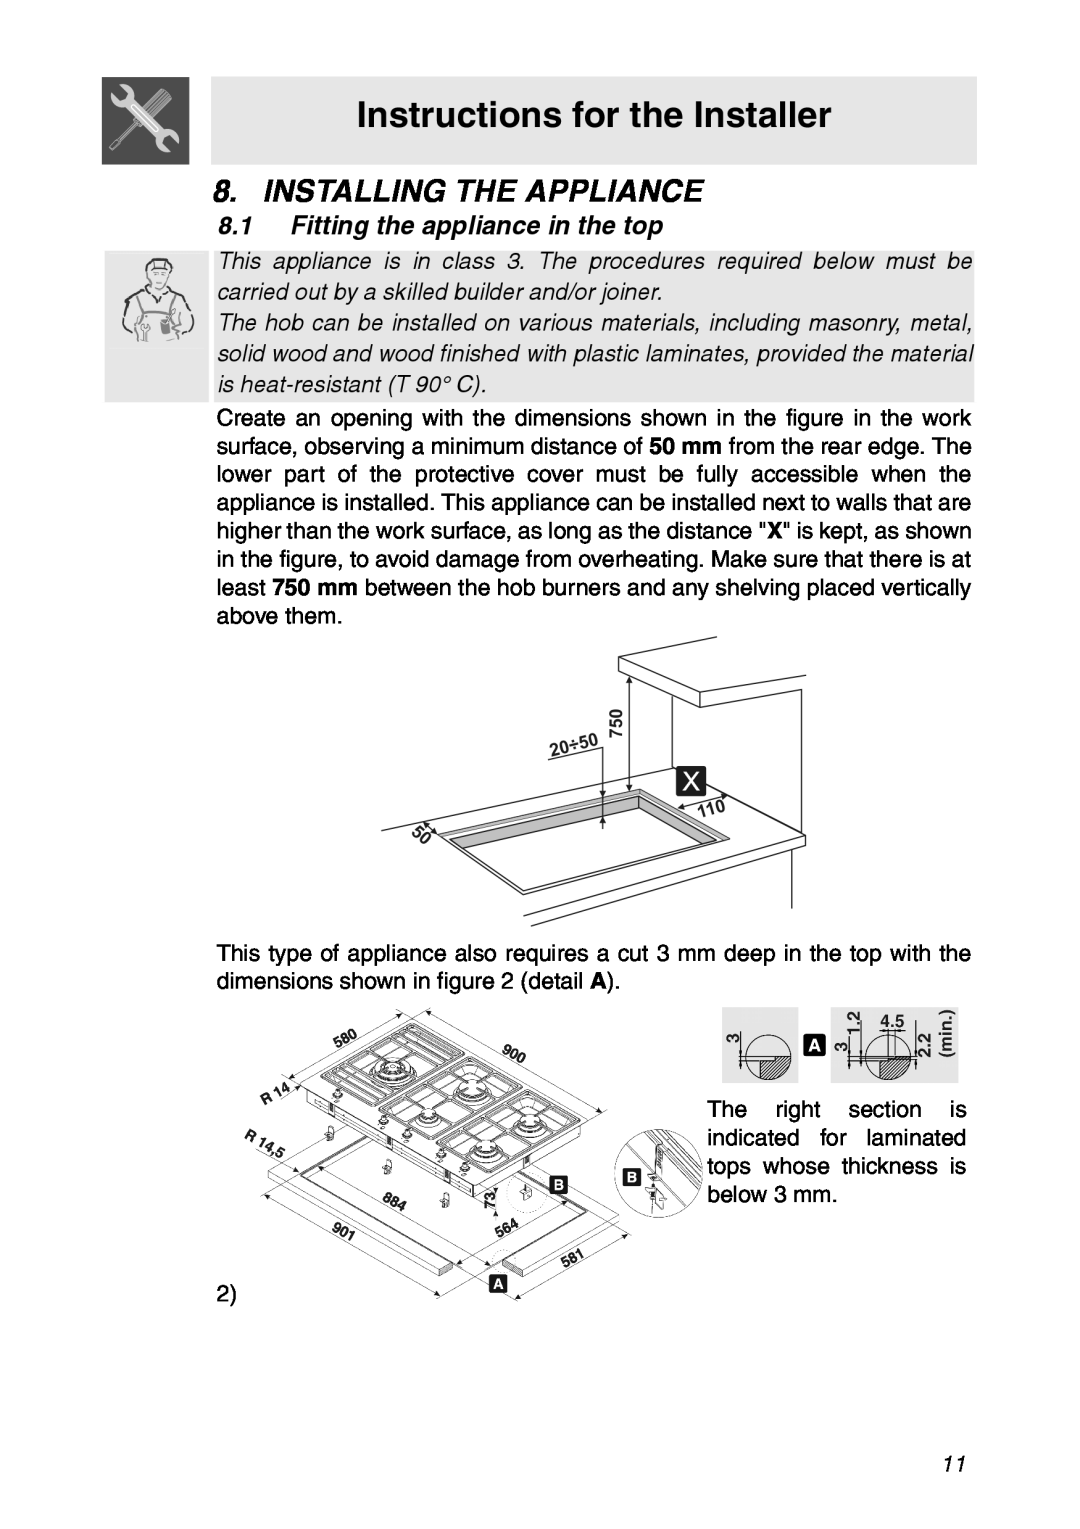 Smeg CIR900X manual Instructions for the Installer, Installing The Appliance, 8.1Fitting the appliance in the top 